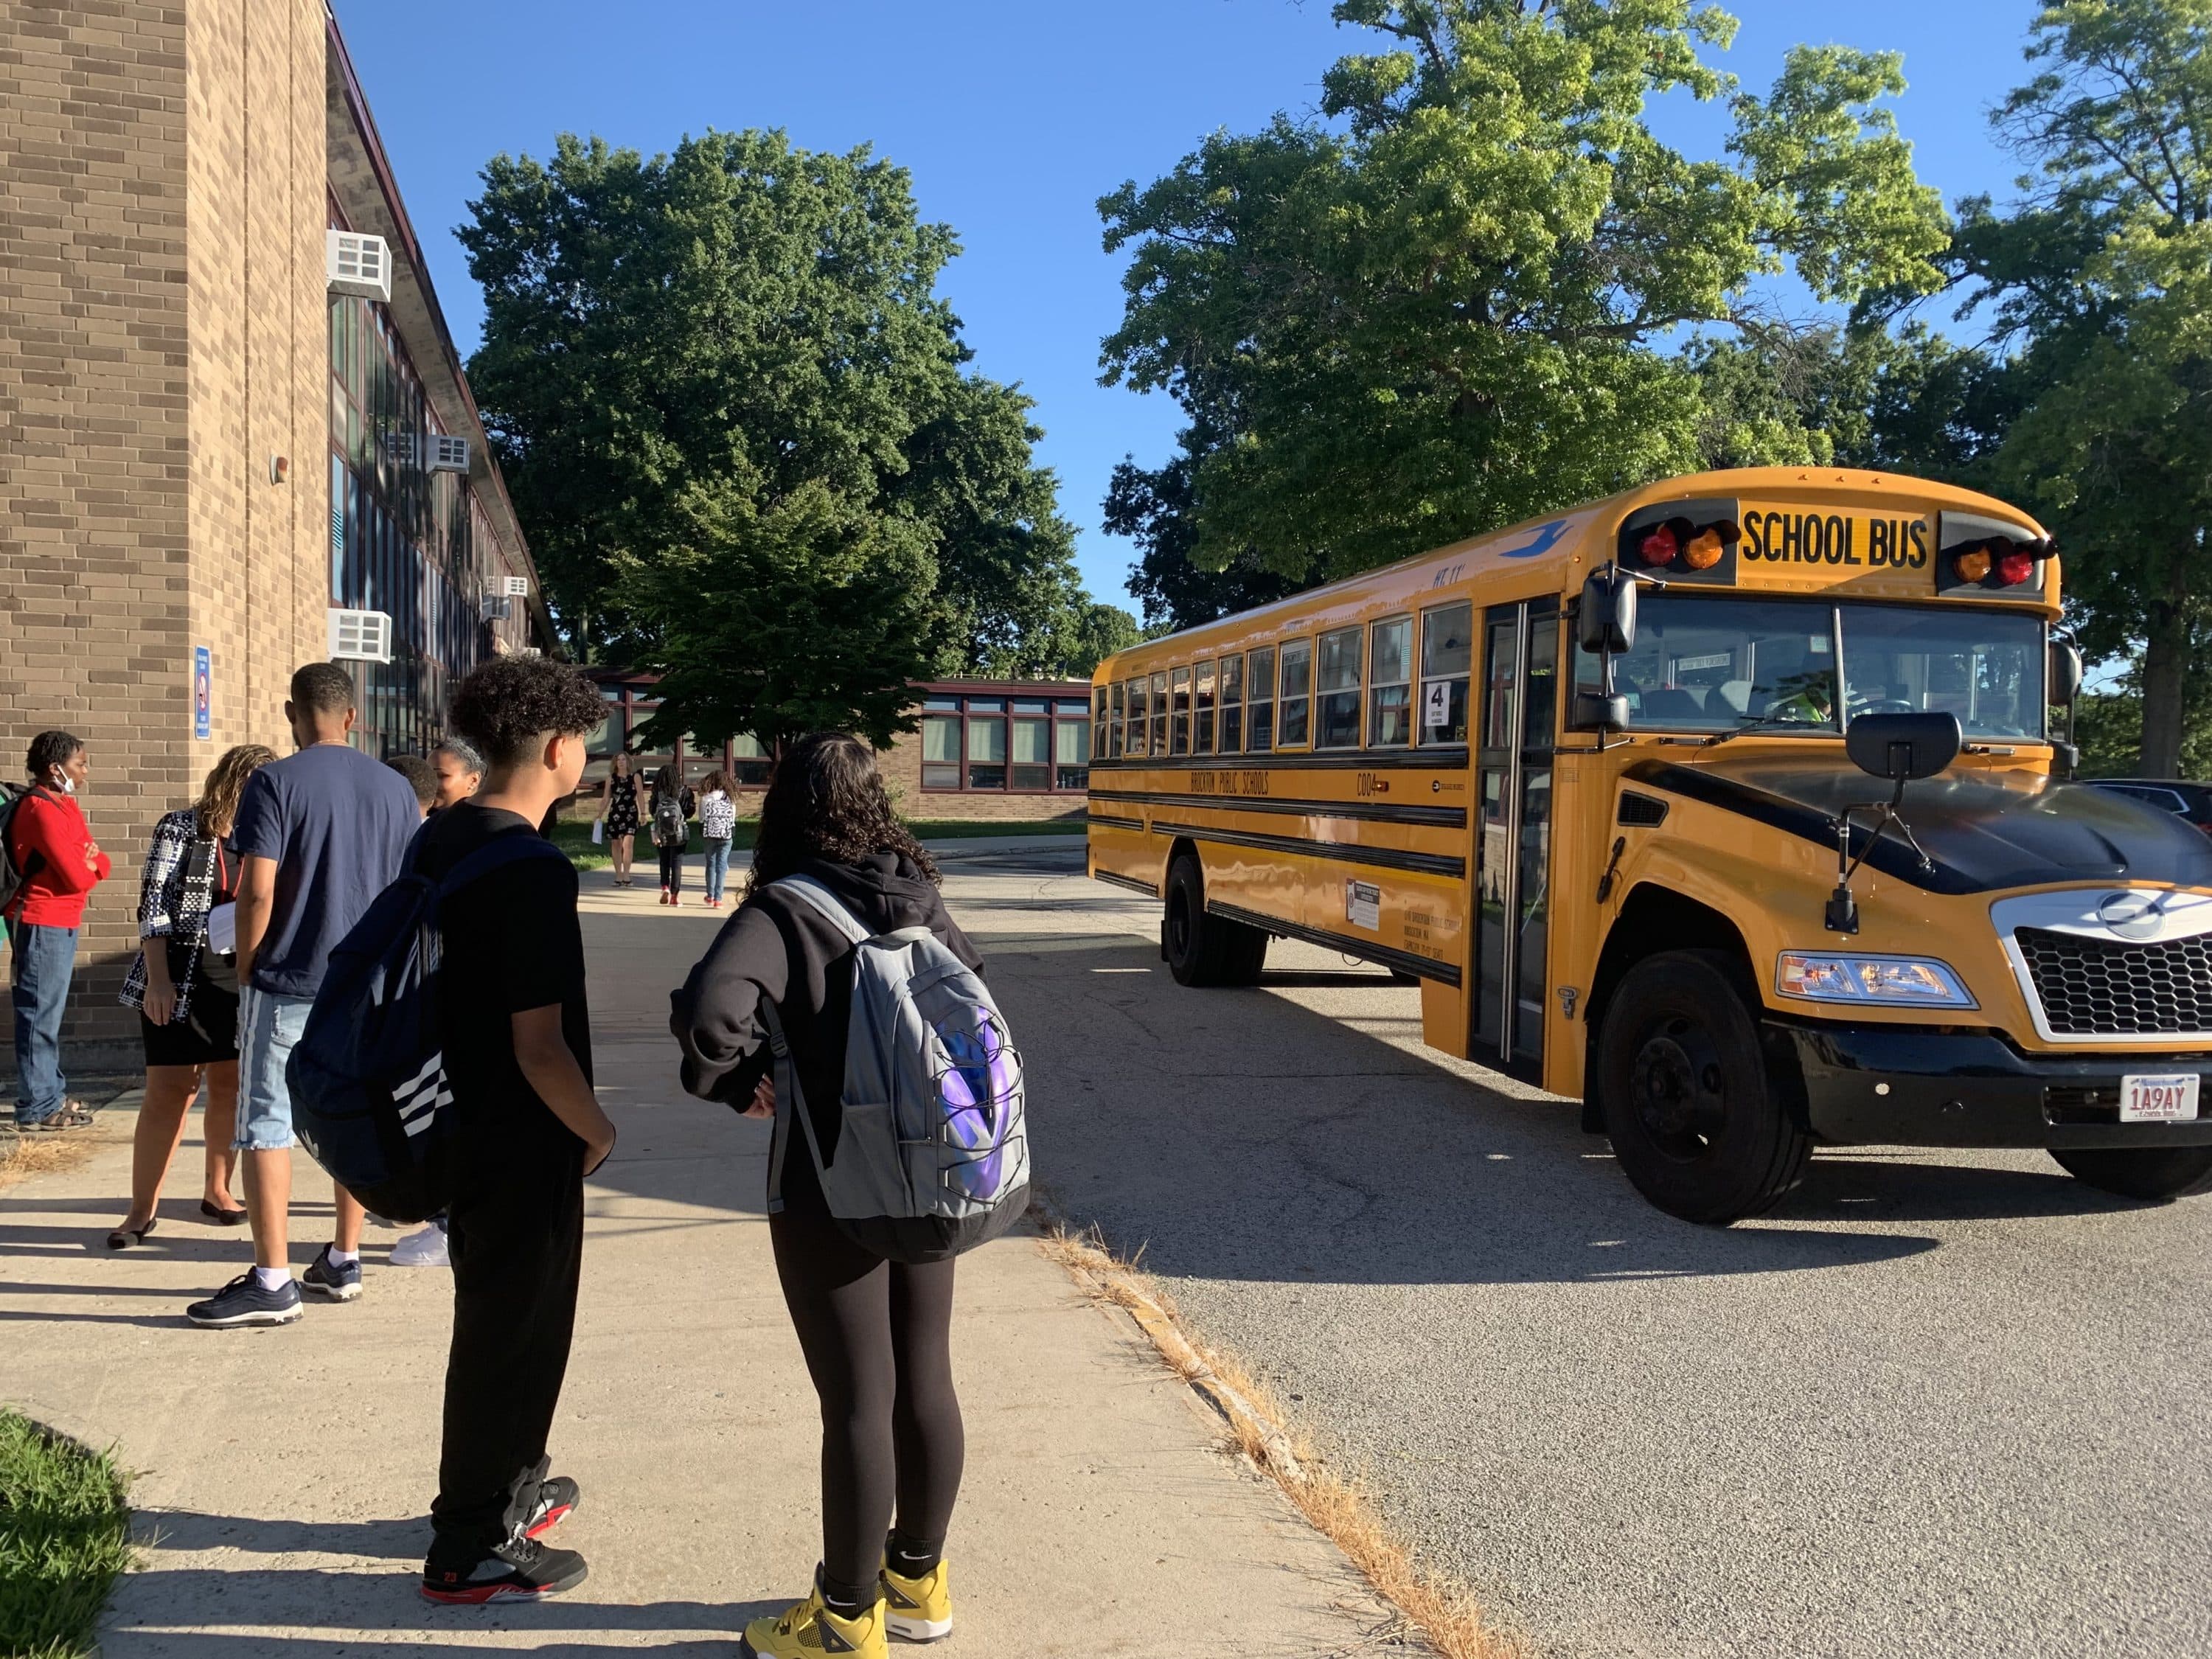 A school bus drops kids off at East Middle School in Brockton on the first day of class. (Carrie Jung/WBUR)